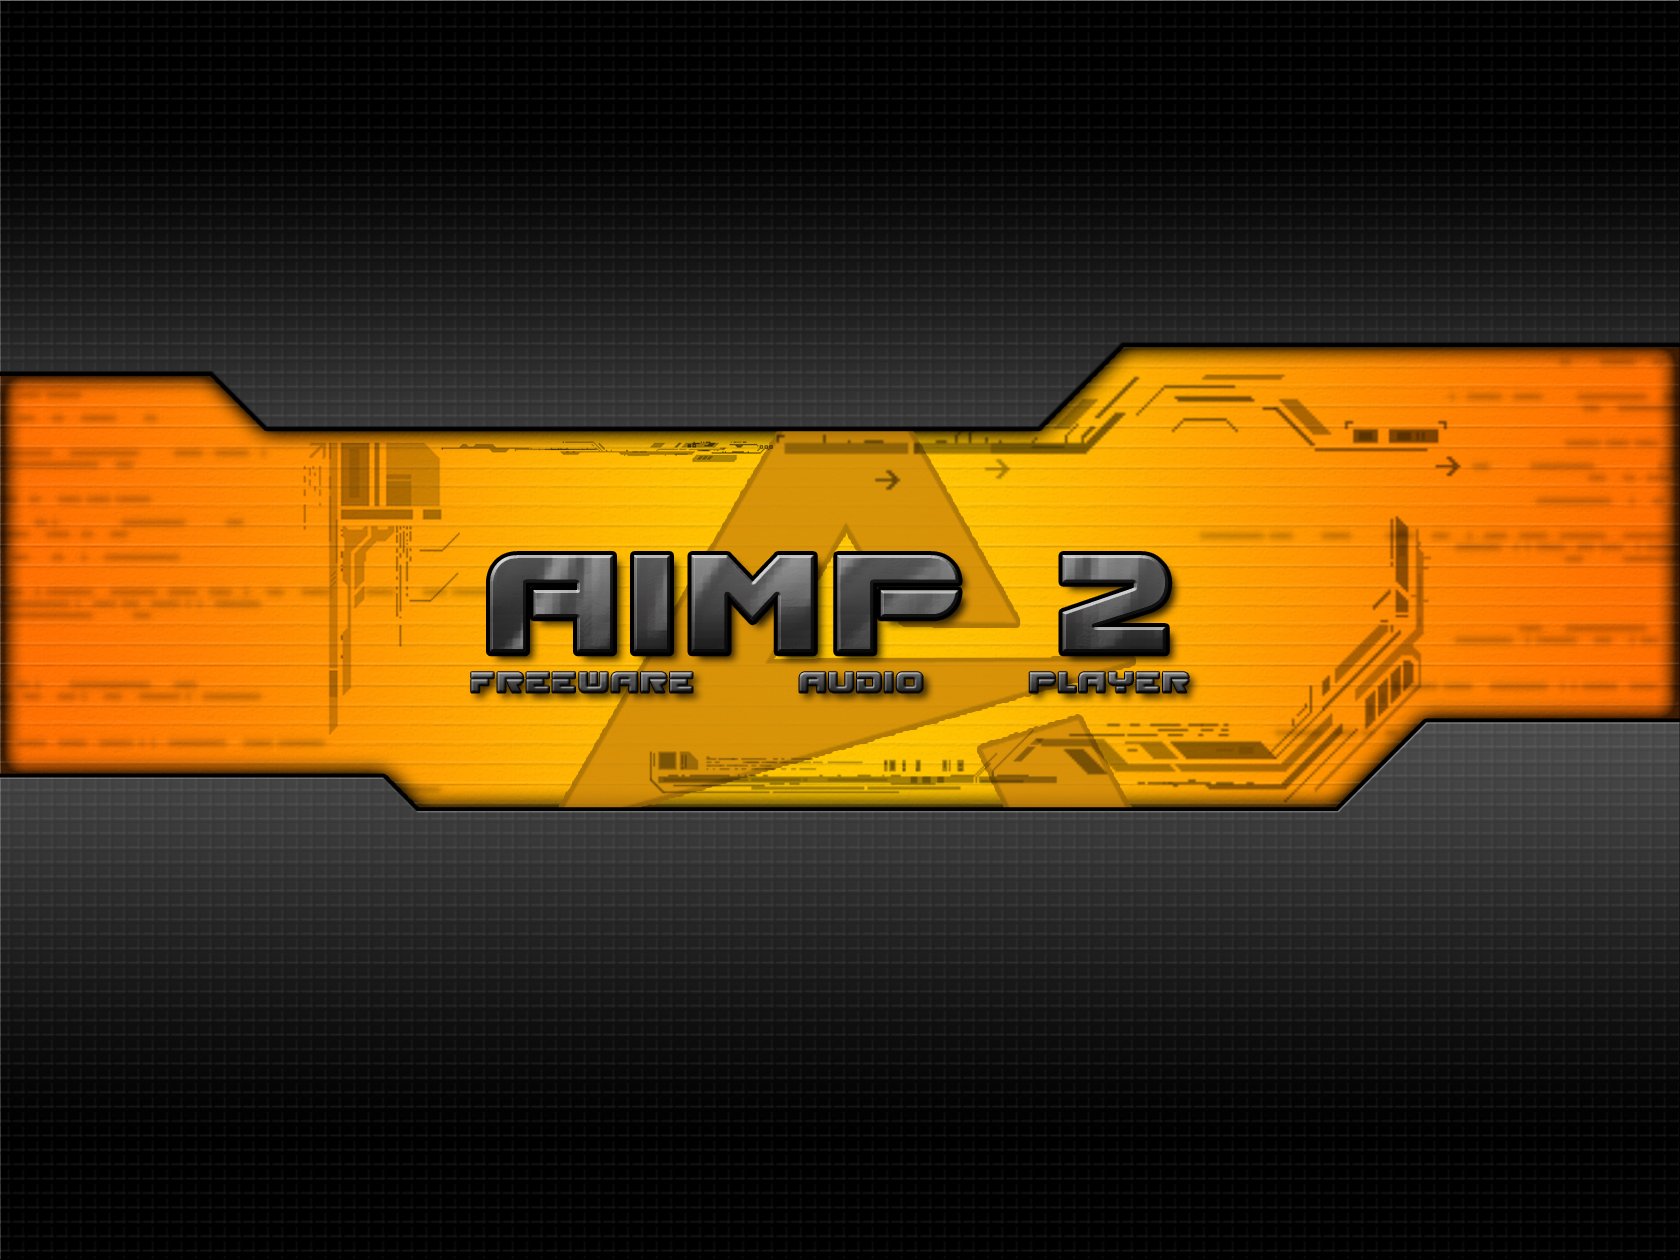 Aimp2 wallpapers